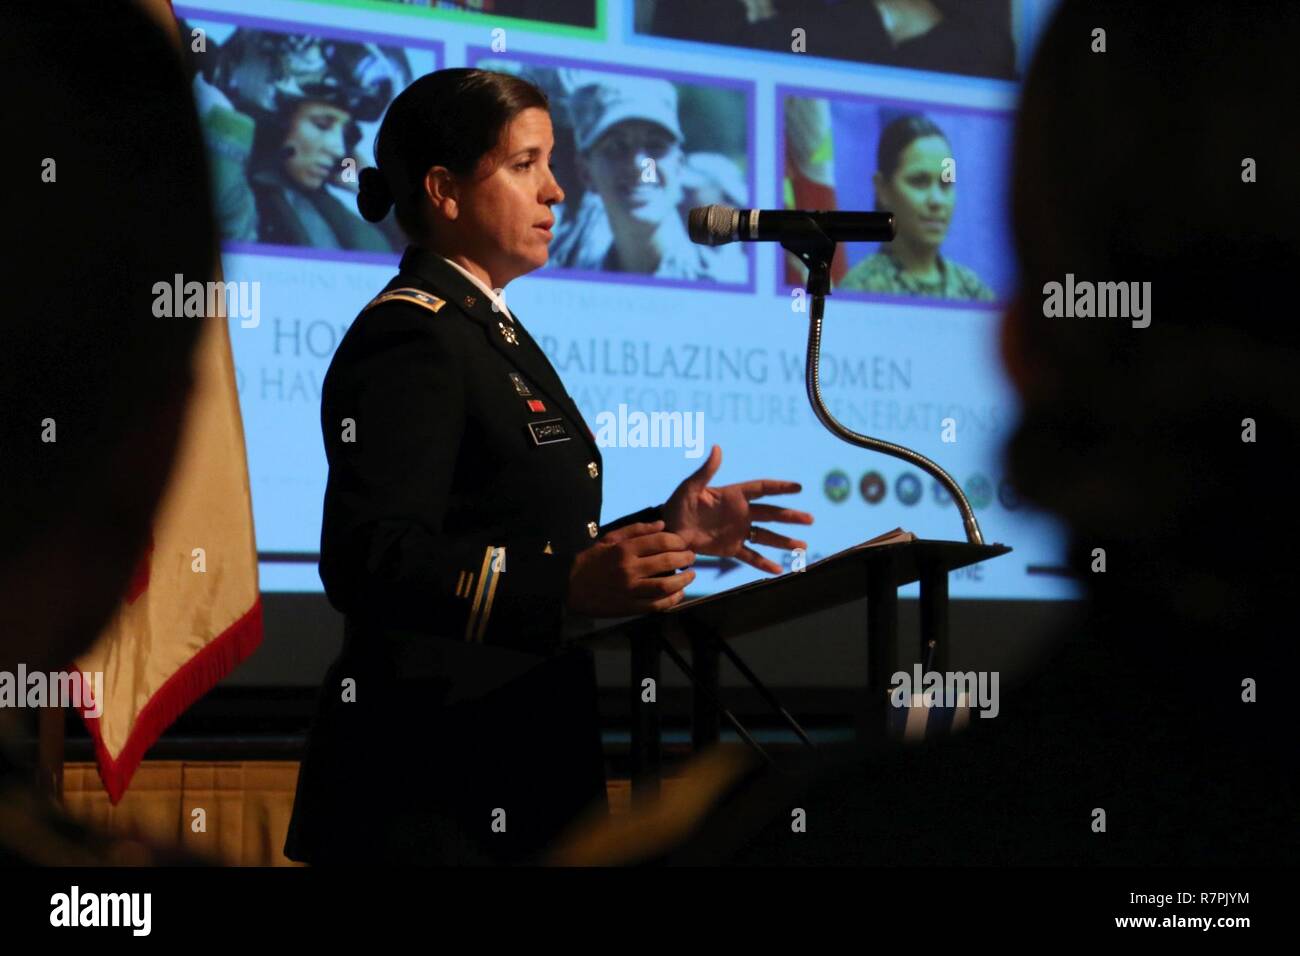 Lt. Col. Jennifer Chapman, 3rd Infantry Division senior intelligence officer, speaks about the contributions of female servicemembers during a Women’s History Month observance March 22, 2017 at Fort Stewart, Ga. This year’s theme was “Honoring trailblazing women.” Stock Photo